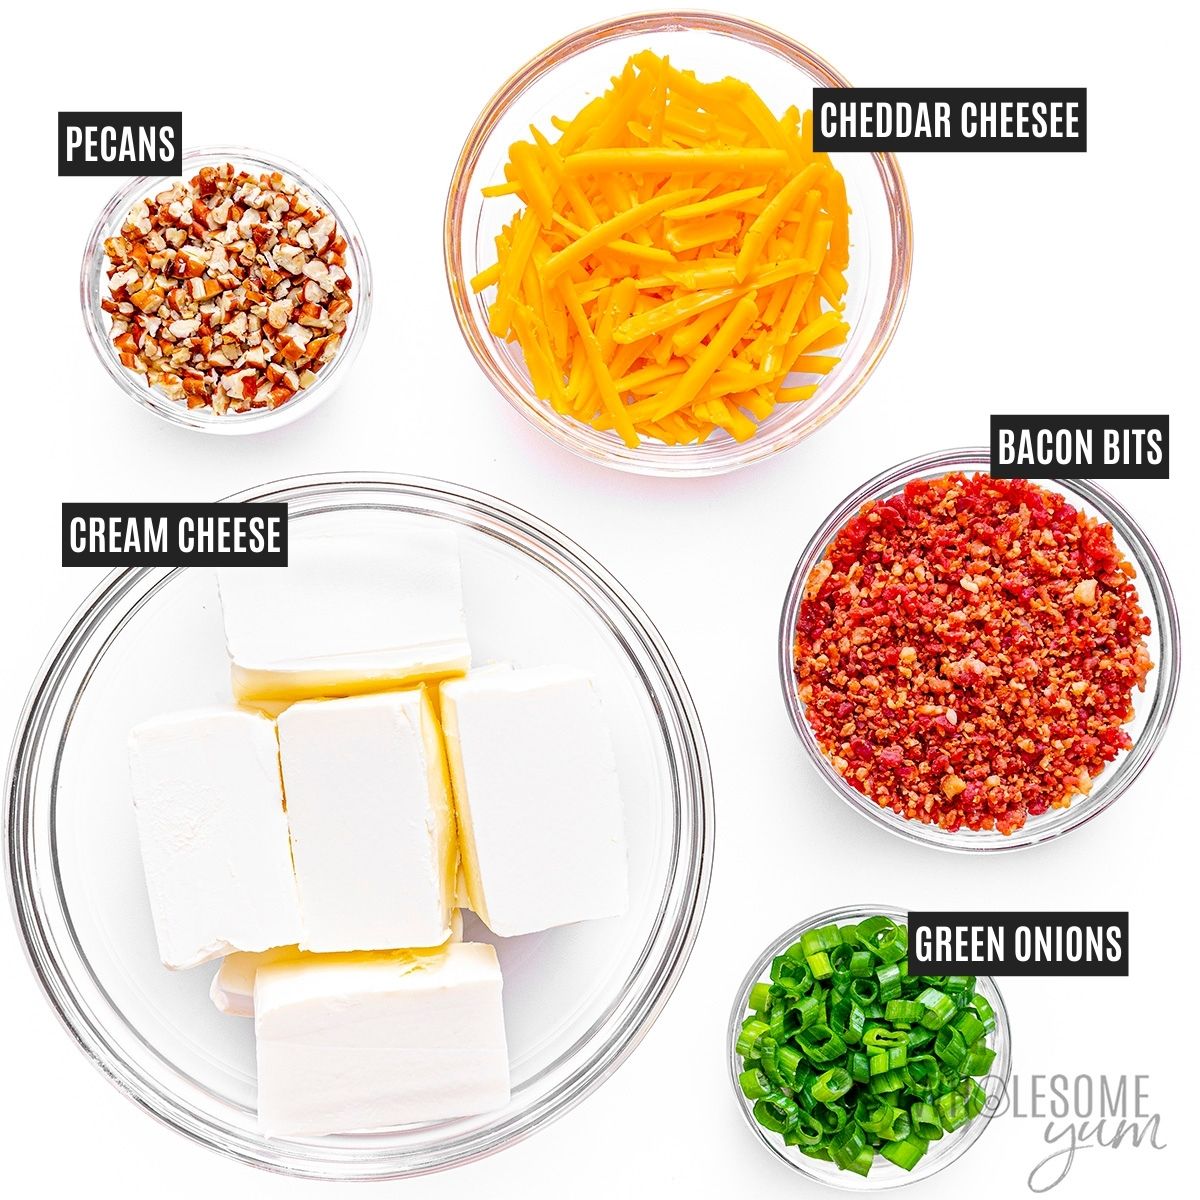 Cheese ball recipe ingredients.